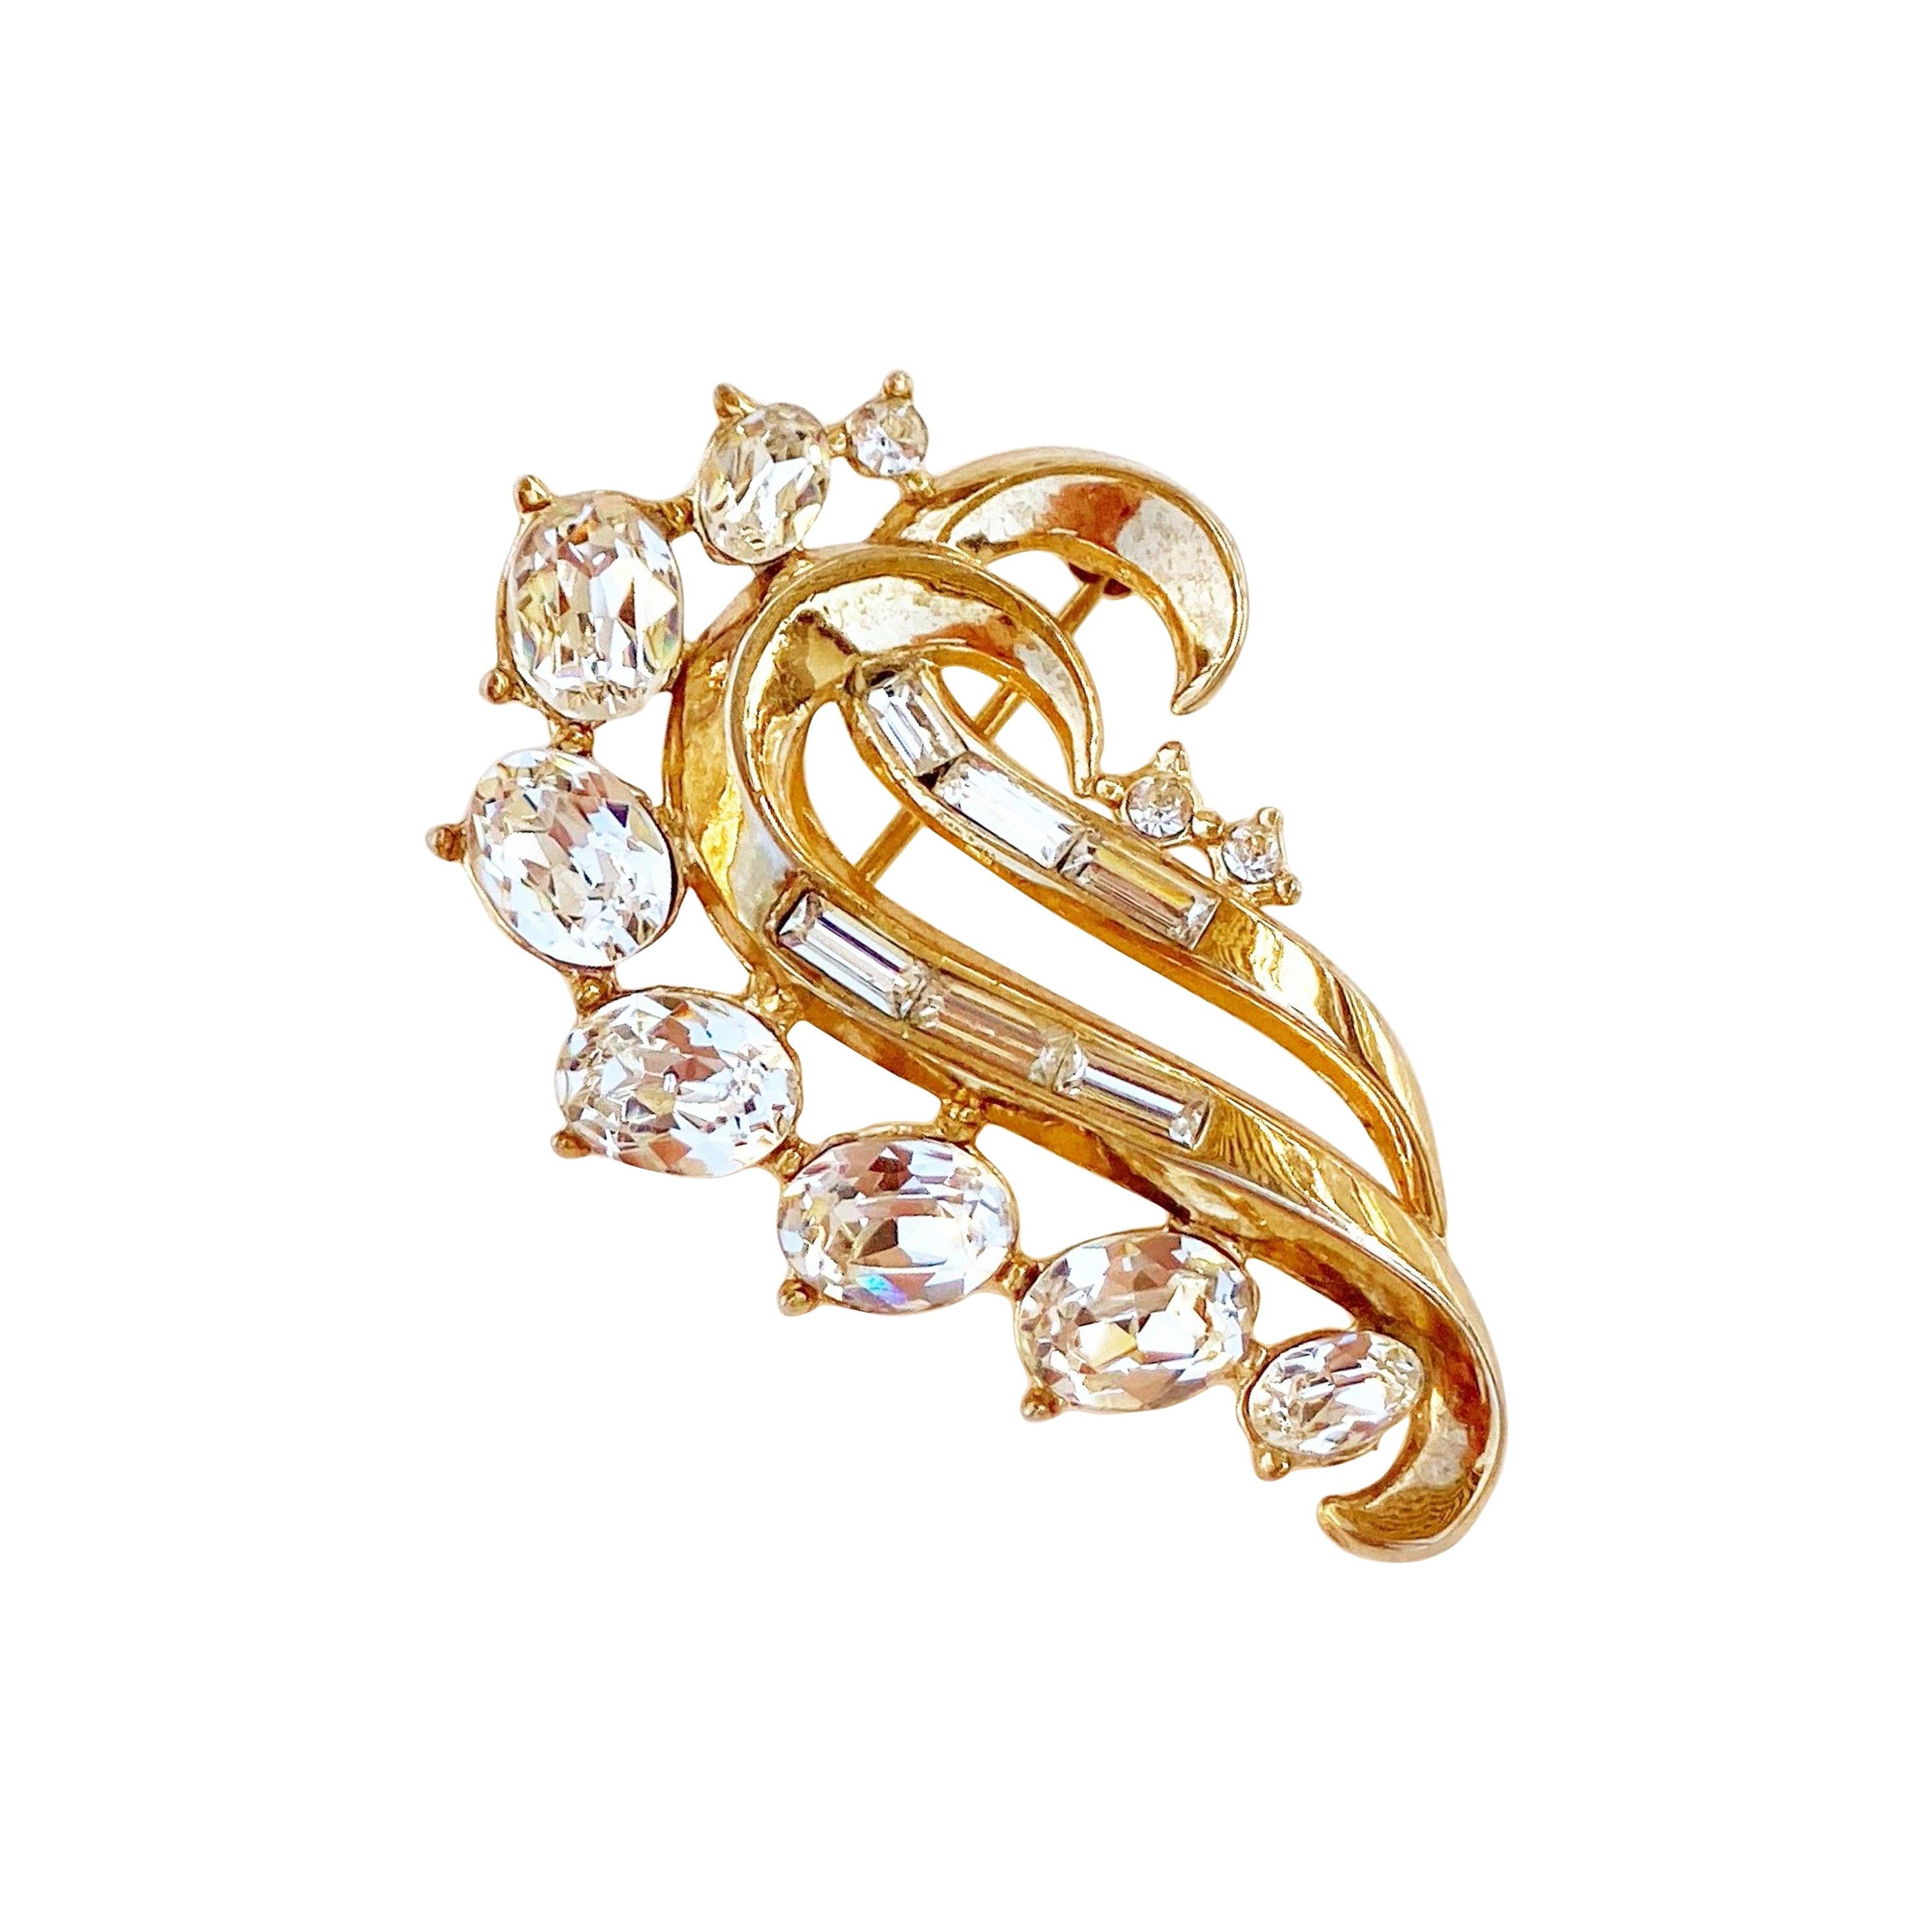 Gilded Swirl Brooch With Crystals By Alfred Philippe For Crown Trifari, 1953 For Sale